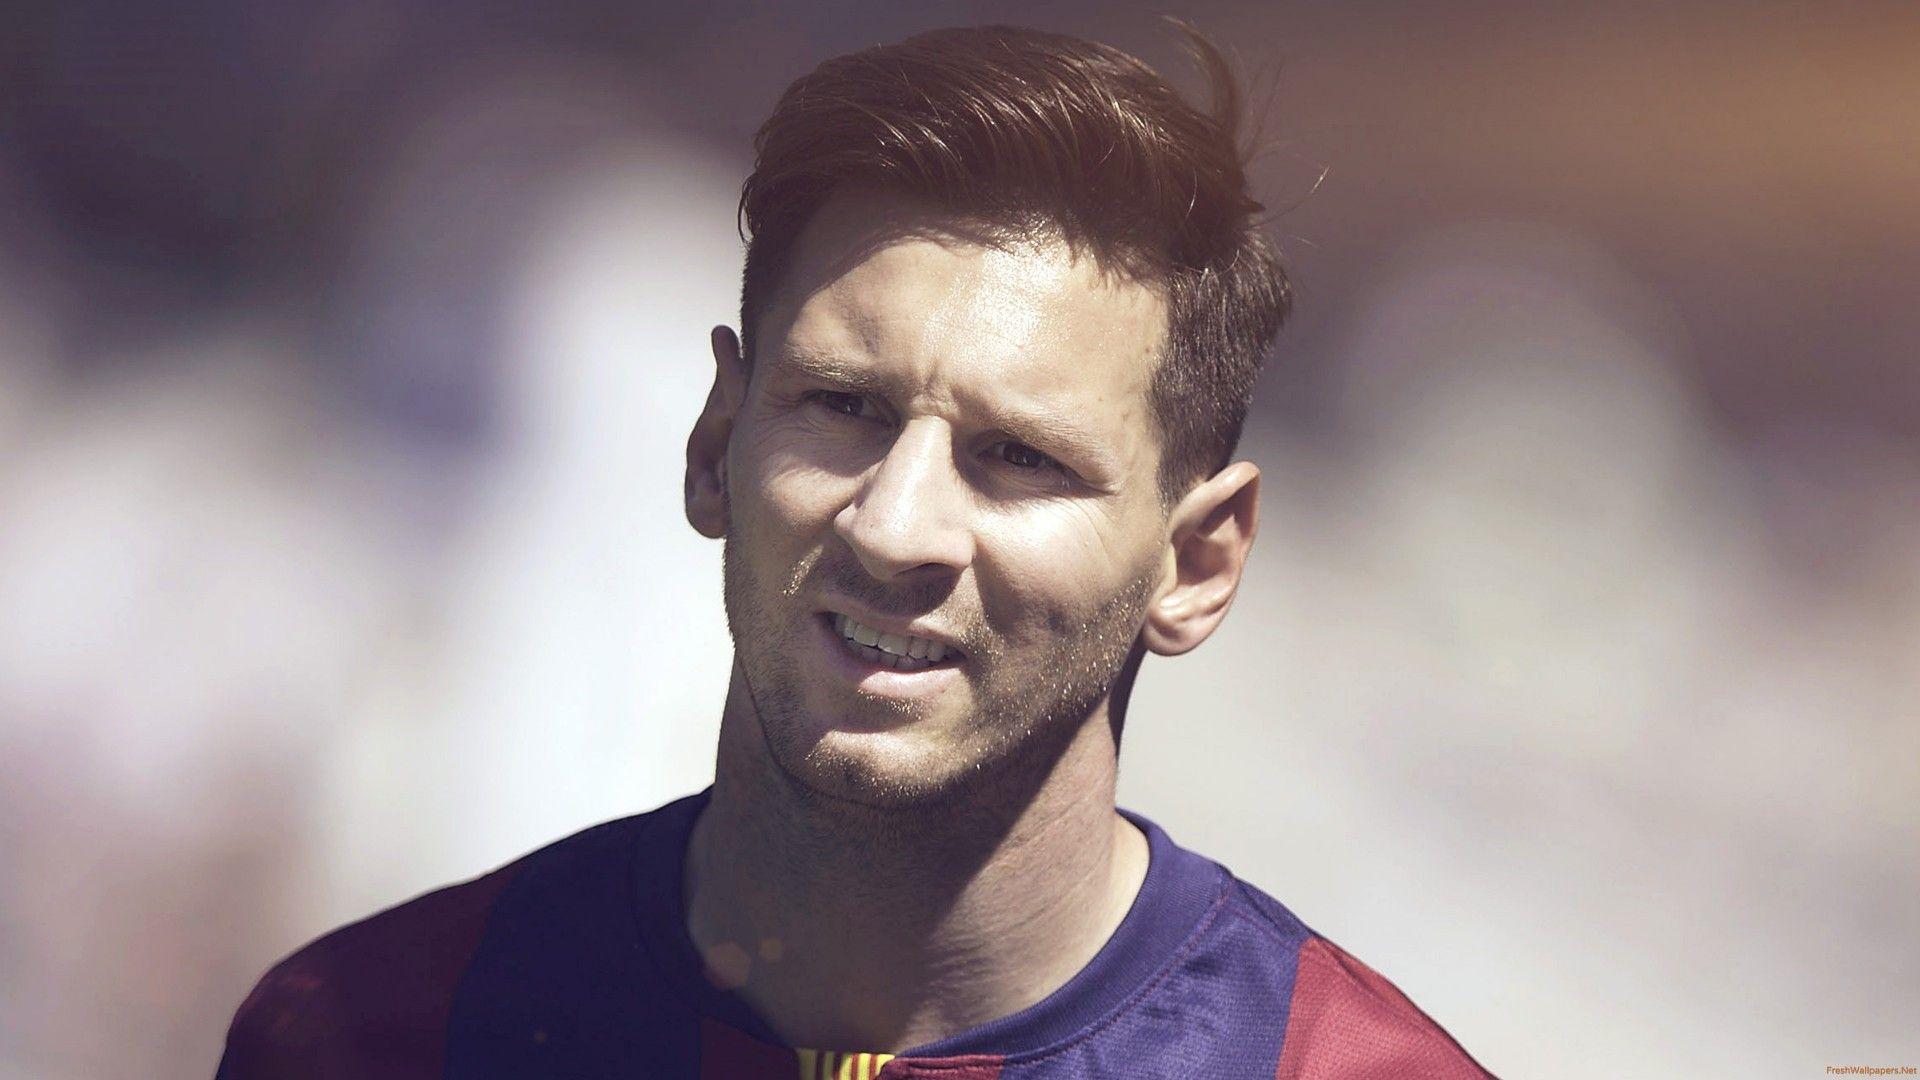 Lionel Messi 2015 Barca Hair Style 4K wallpaper